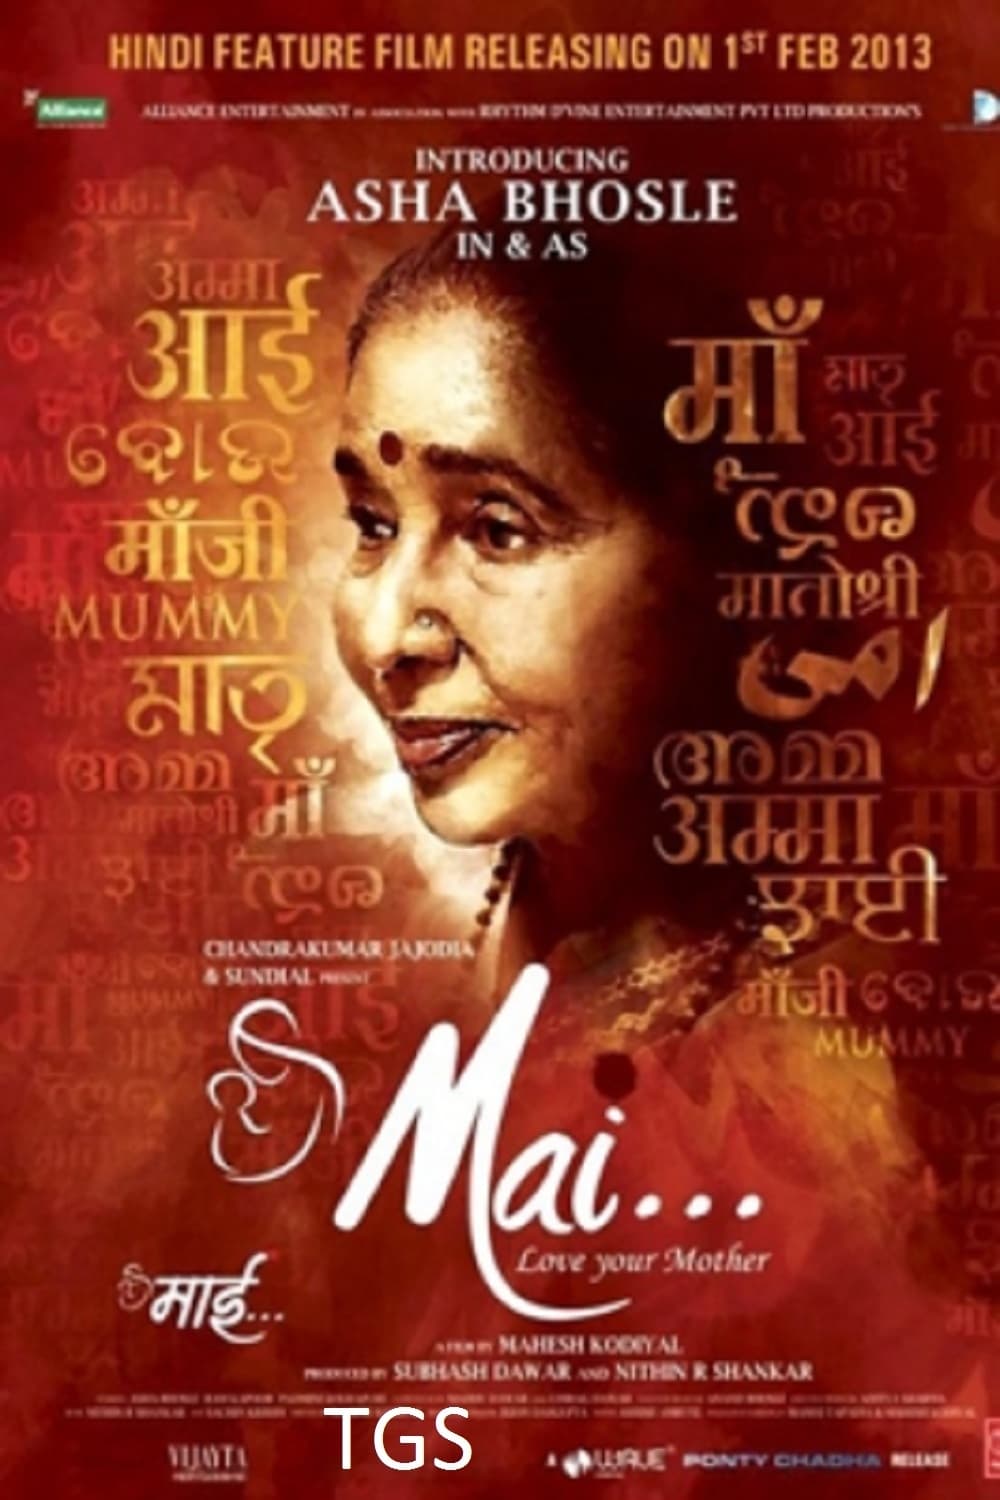 Poster for the movie "Mai"